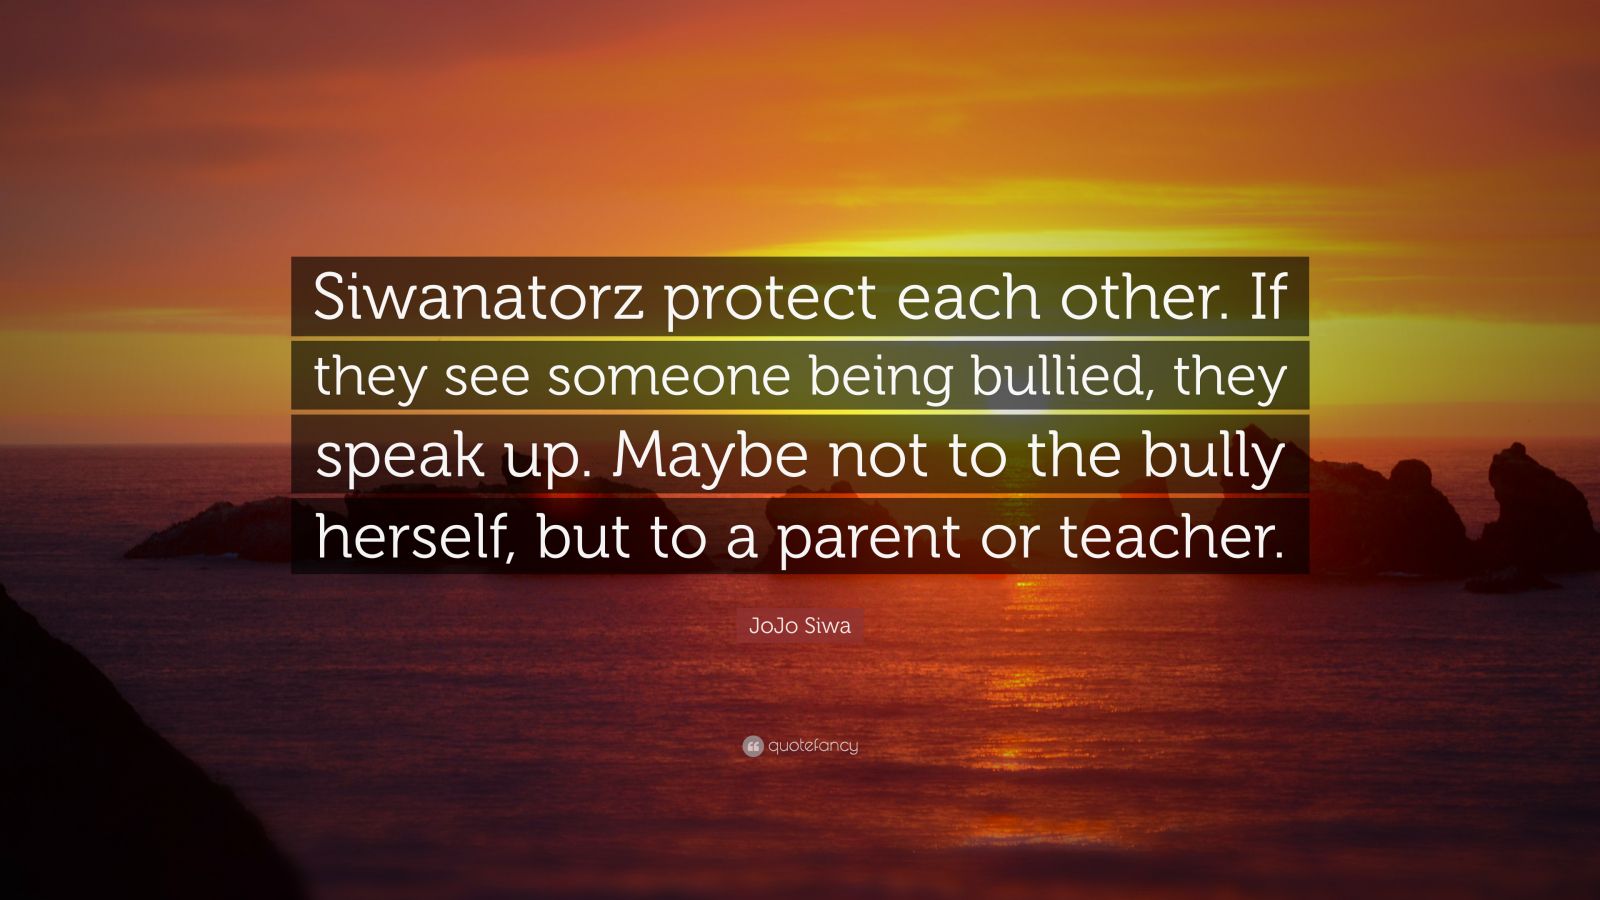 JoJo Siwa Quote: “Siwanatorz protect each other. If they see someone ...